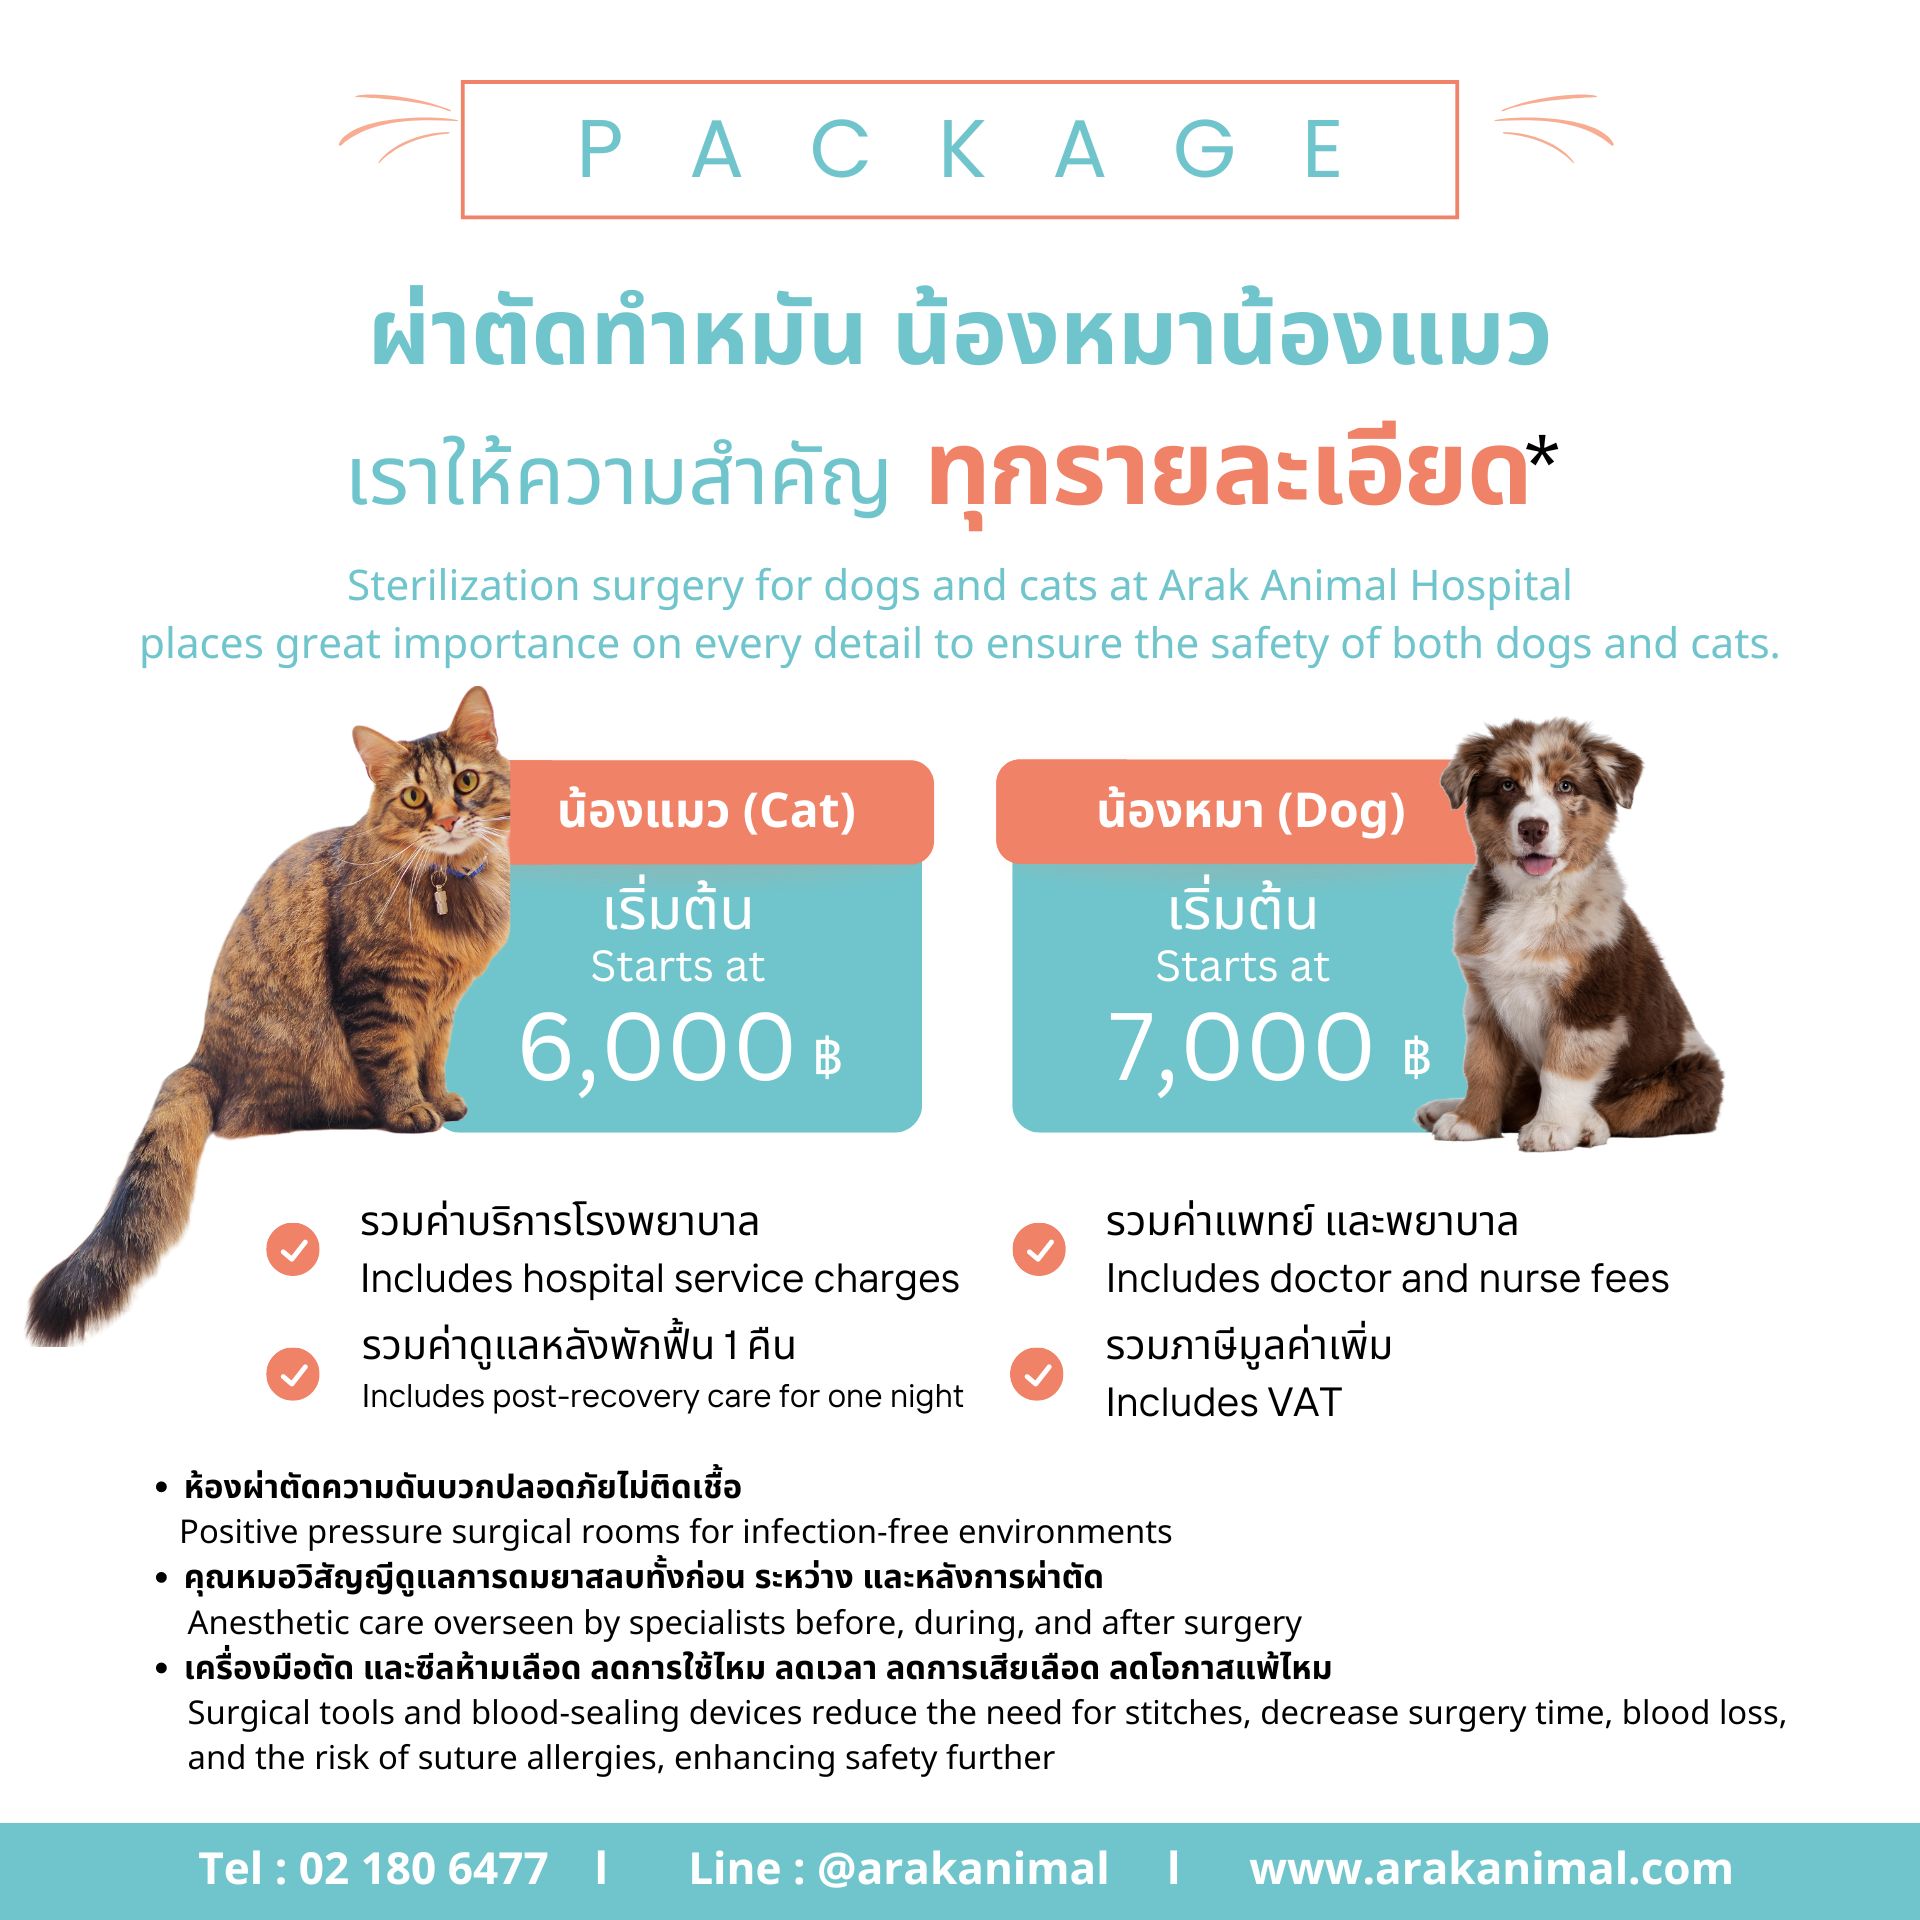 Sterilization surgery for dogs and cats at Arak Animal Hospital places great importance on every detail to ensure the safety of both dogs and cats.